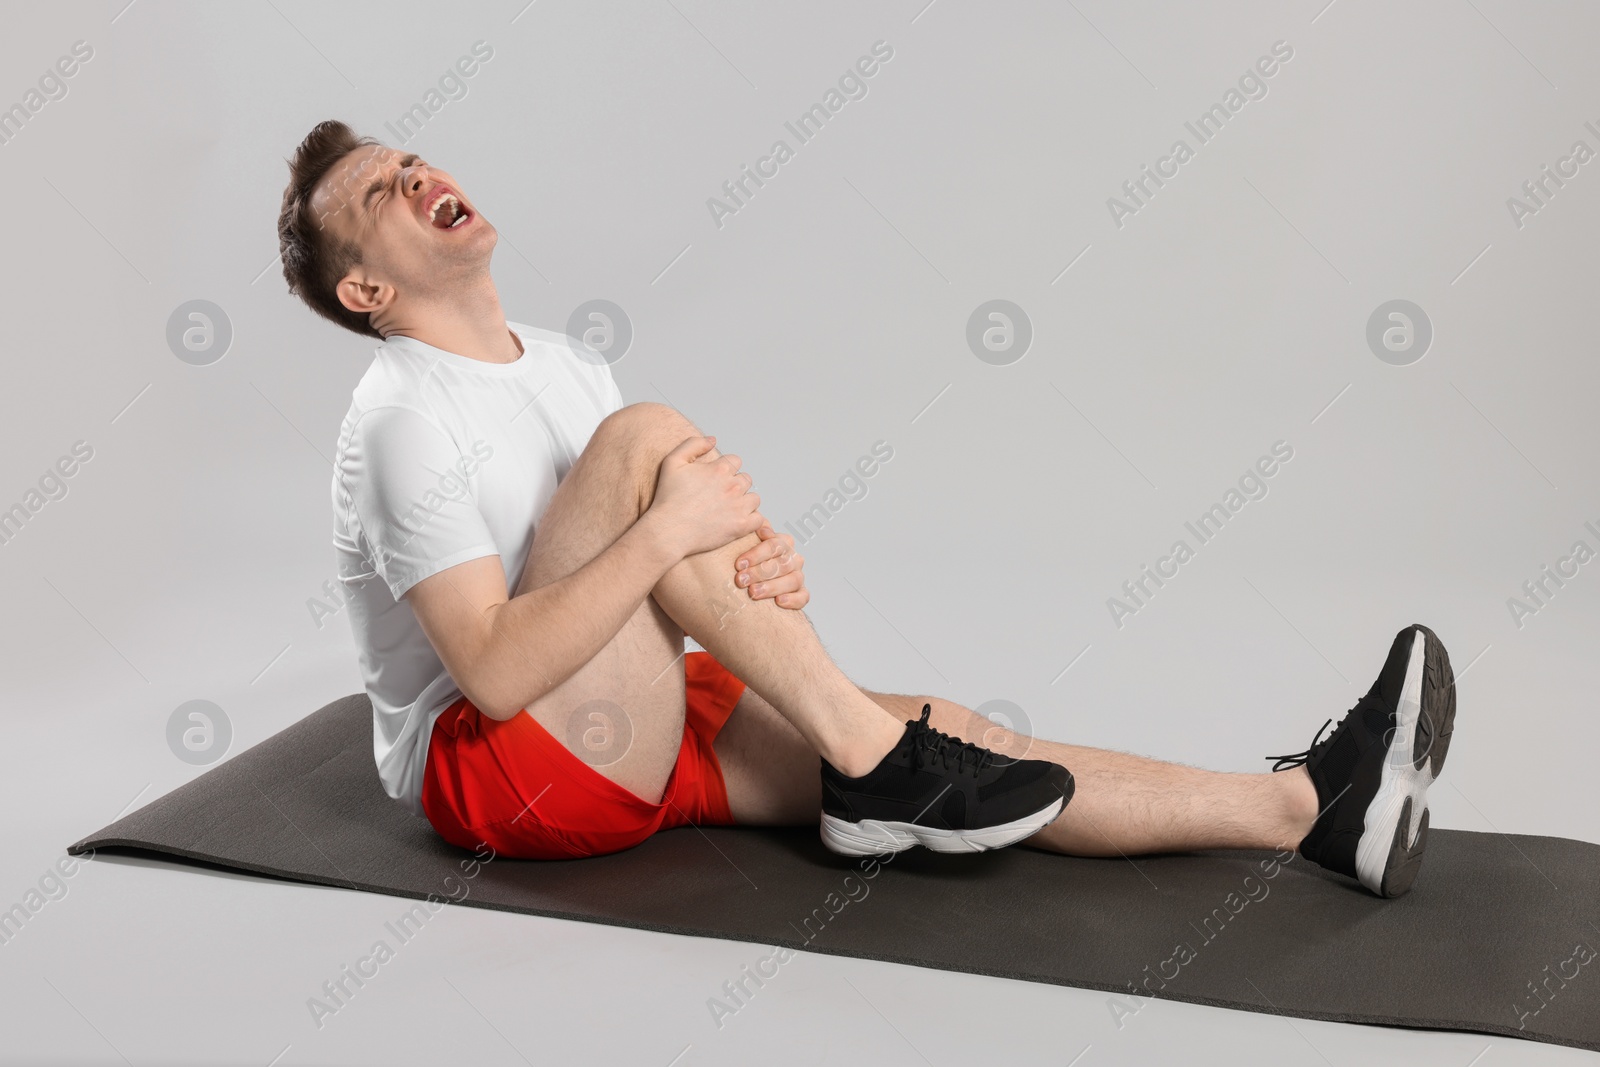 Photo of Man suffering from leg pain on mat against grey background